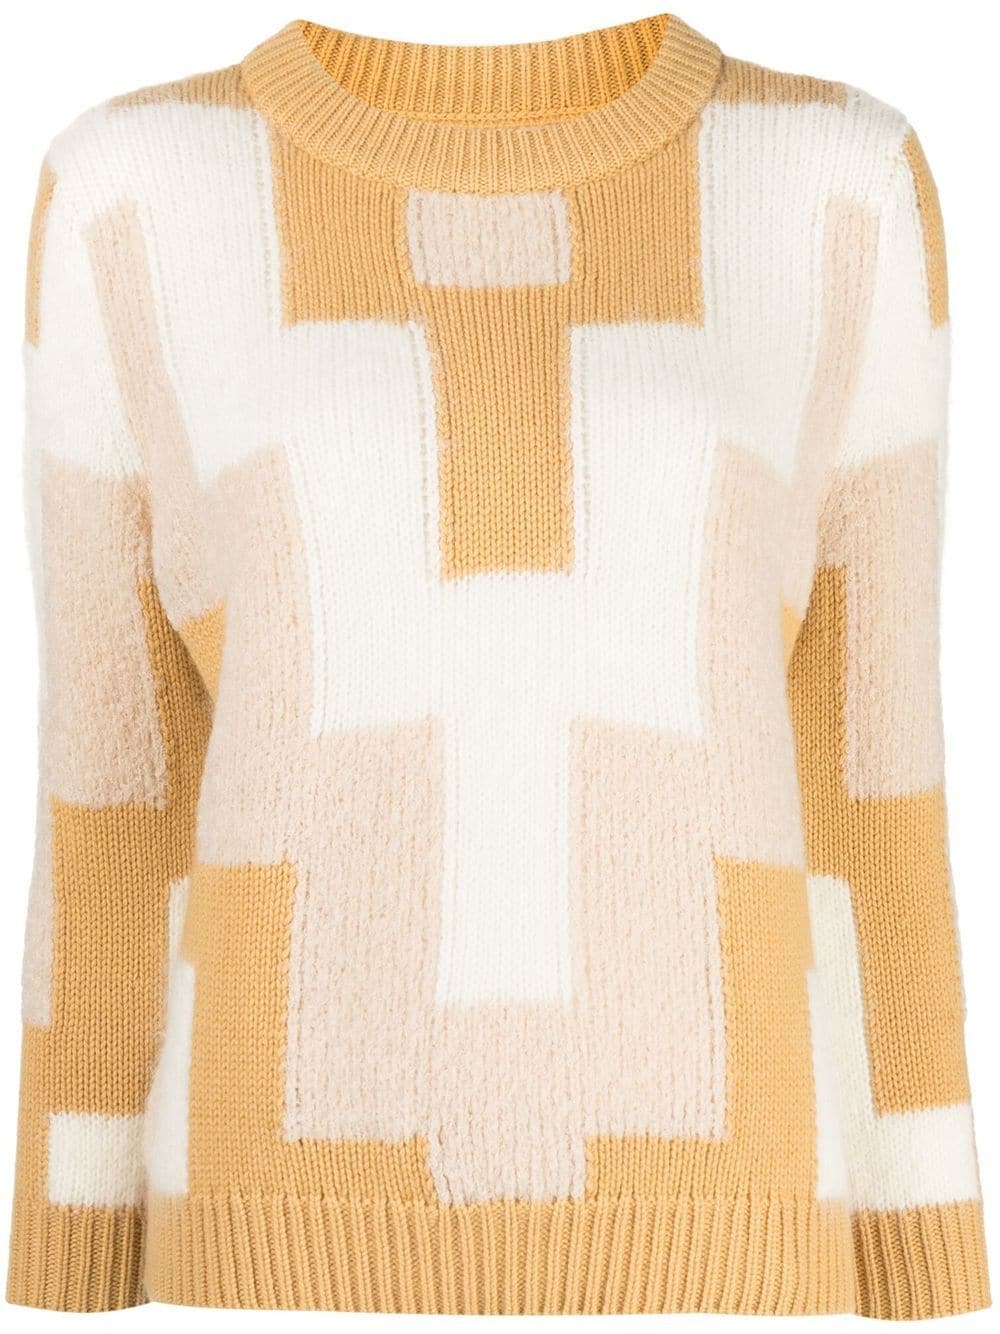 Image 1 of Onefifteen geometric-panelled knit sweater